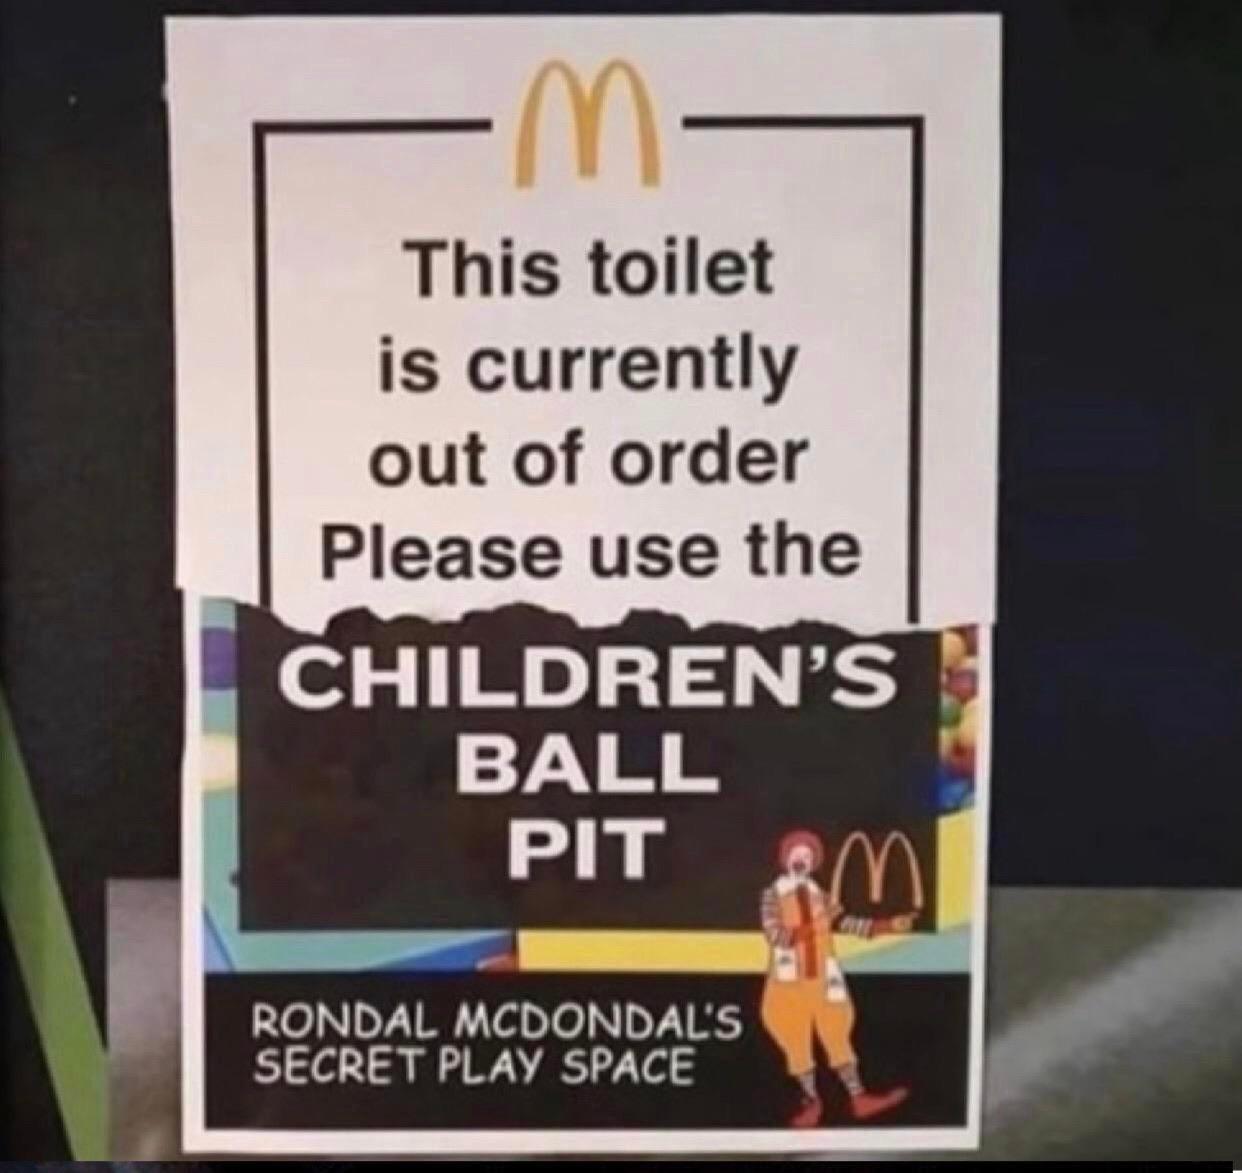 History,  History Memes History,  text: This toilet is currently out of order Please use the CHILDREN'S BALL PIT RONDAL MCDONDACS SECRET PLAY SPACE 